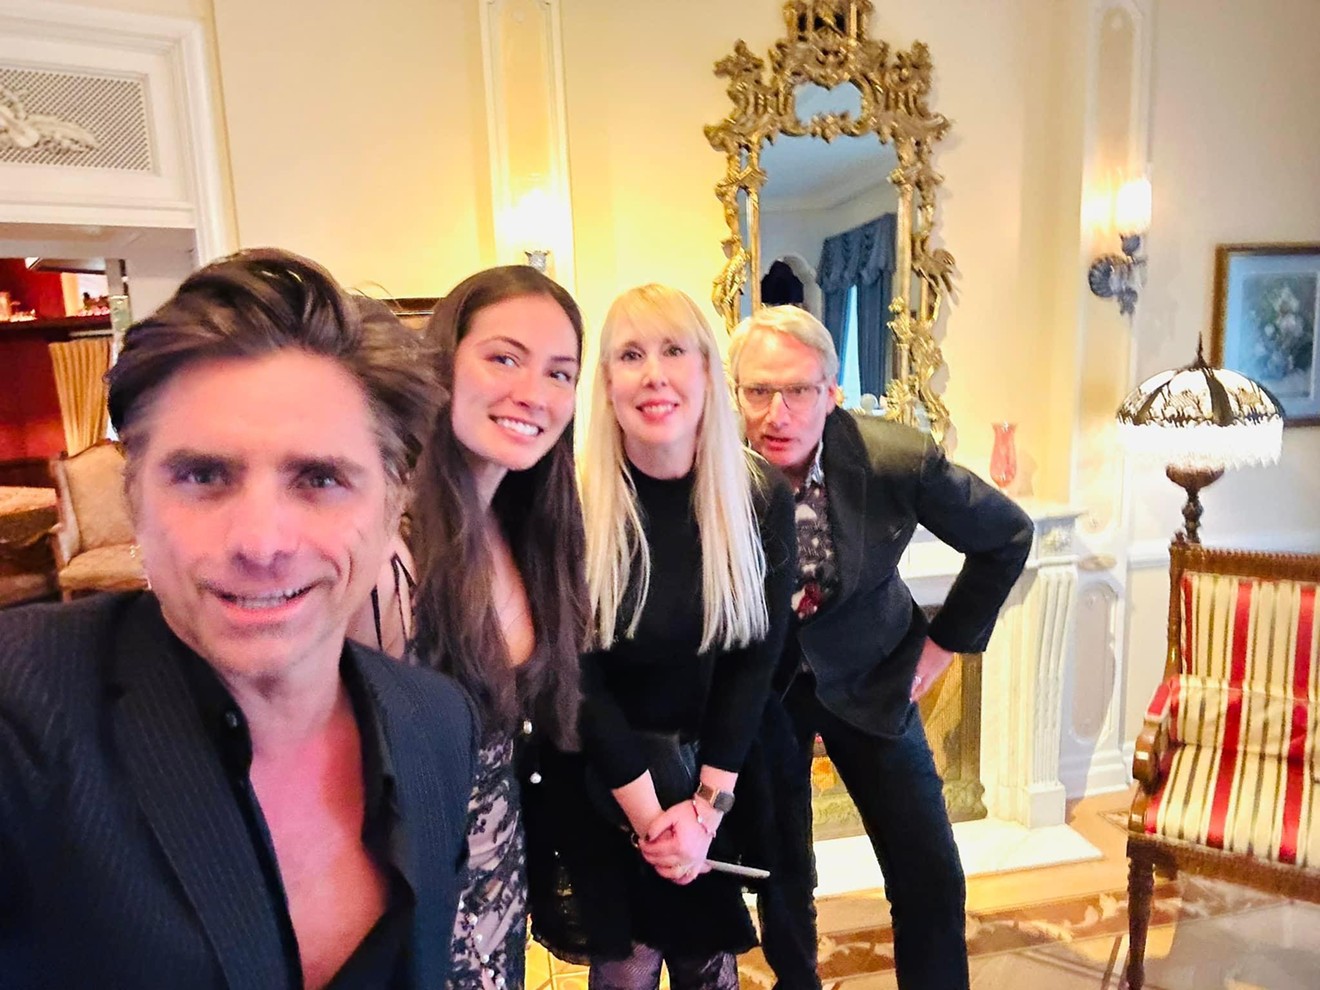 From left to right, John Stamos; his wife, Caitlin McHugh; author Daphne Young; and her husband, Michael Meyer, take a selfie during a trip to Disneyland.